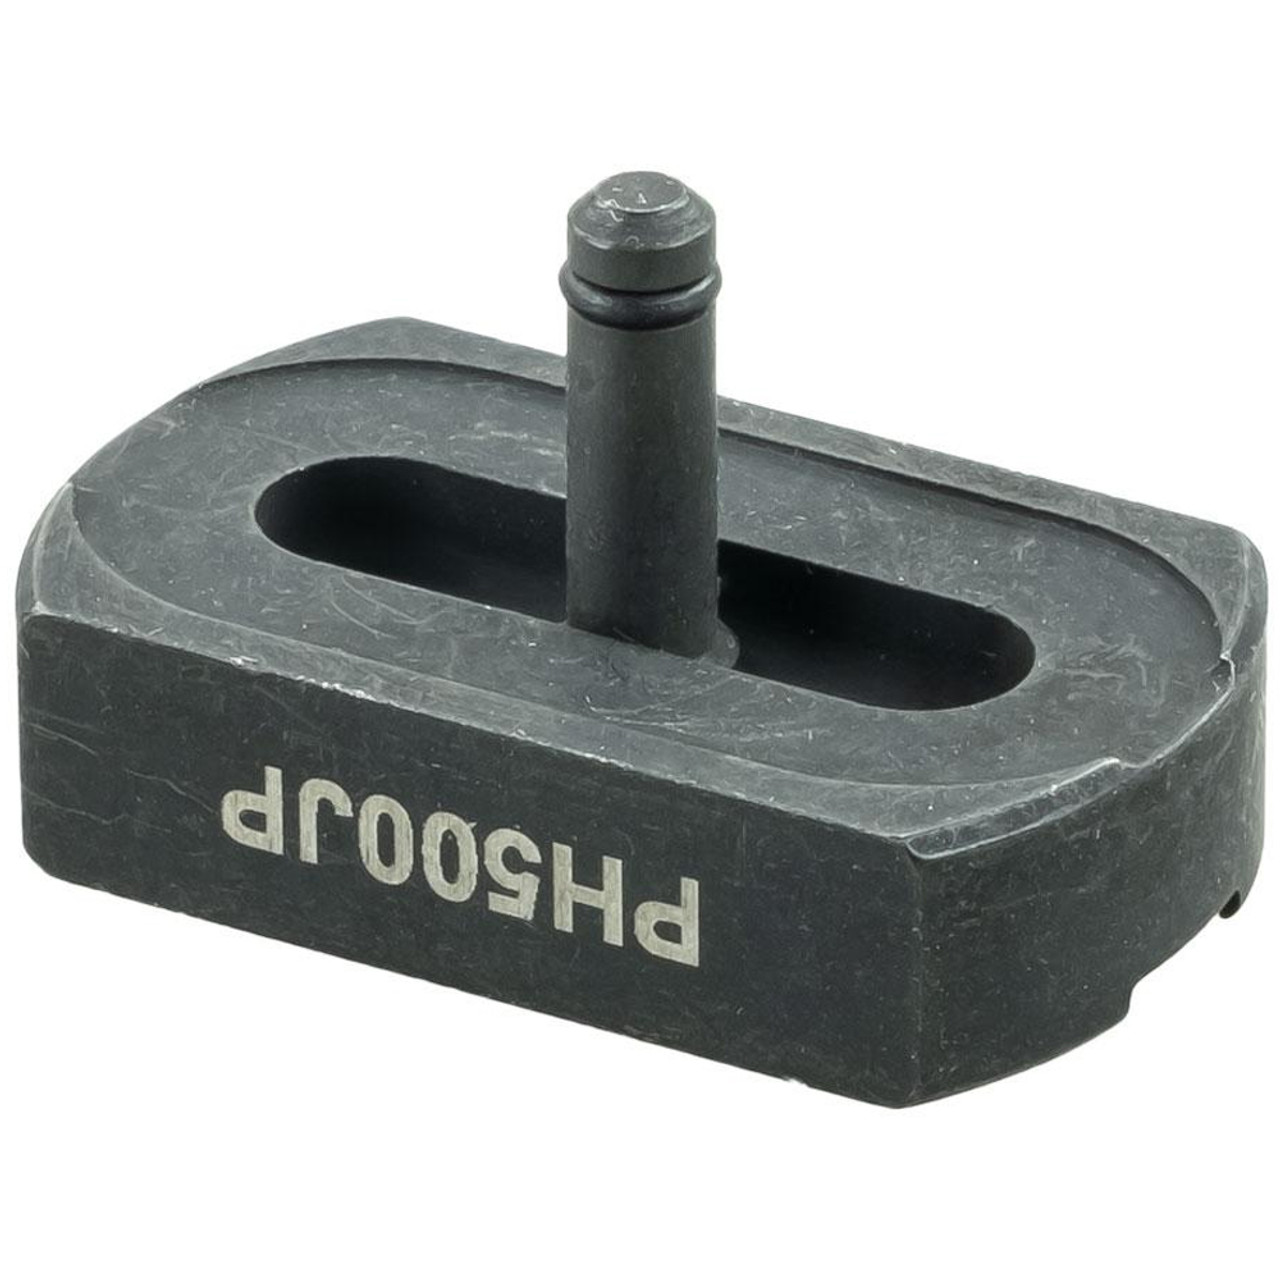 RK Replacement 5-Series Plate Holder for Chain Tool UCT2100